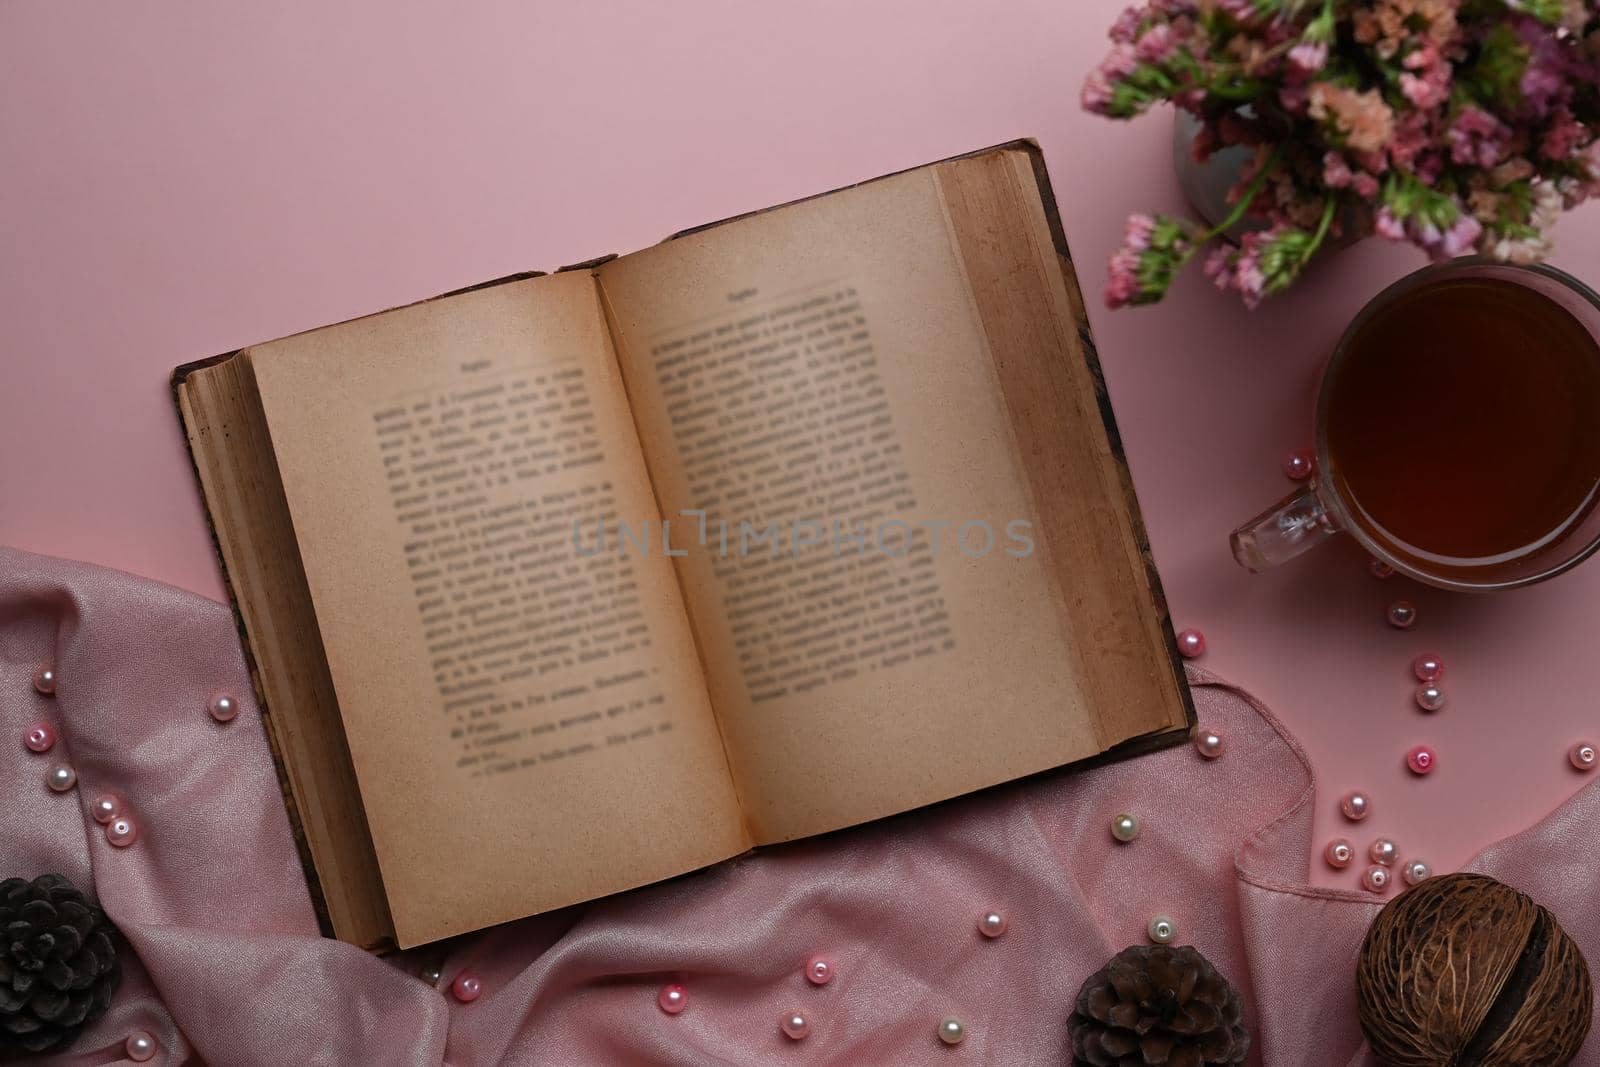 Vintage book, coffee cup and spring flowers on pink background.